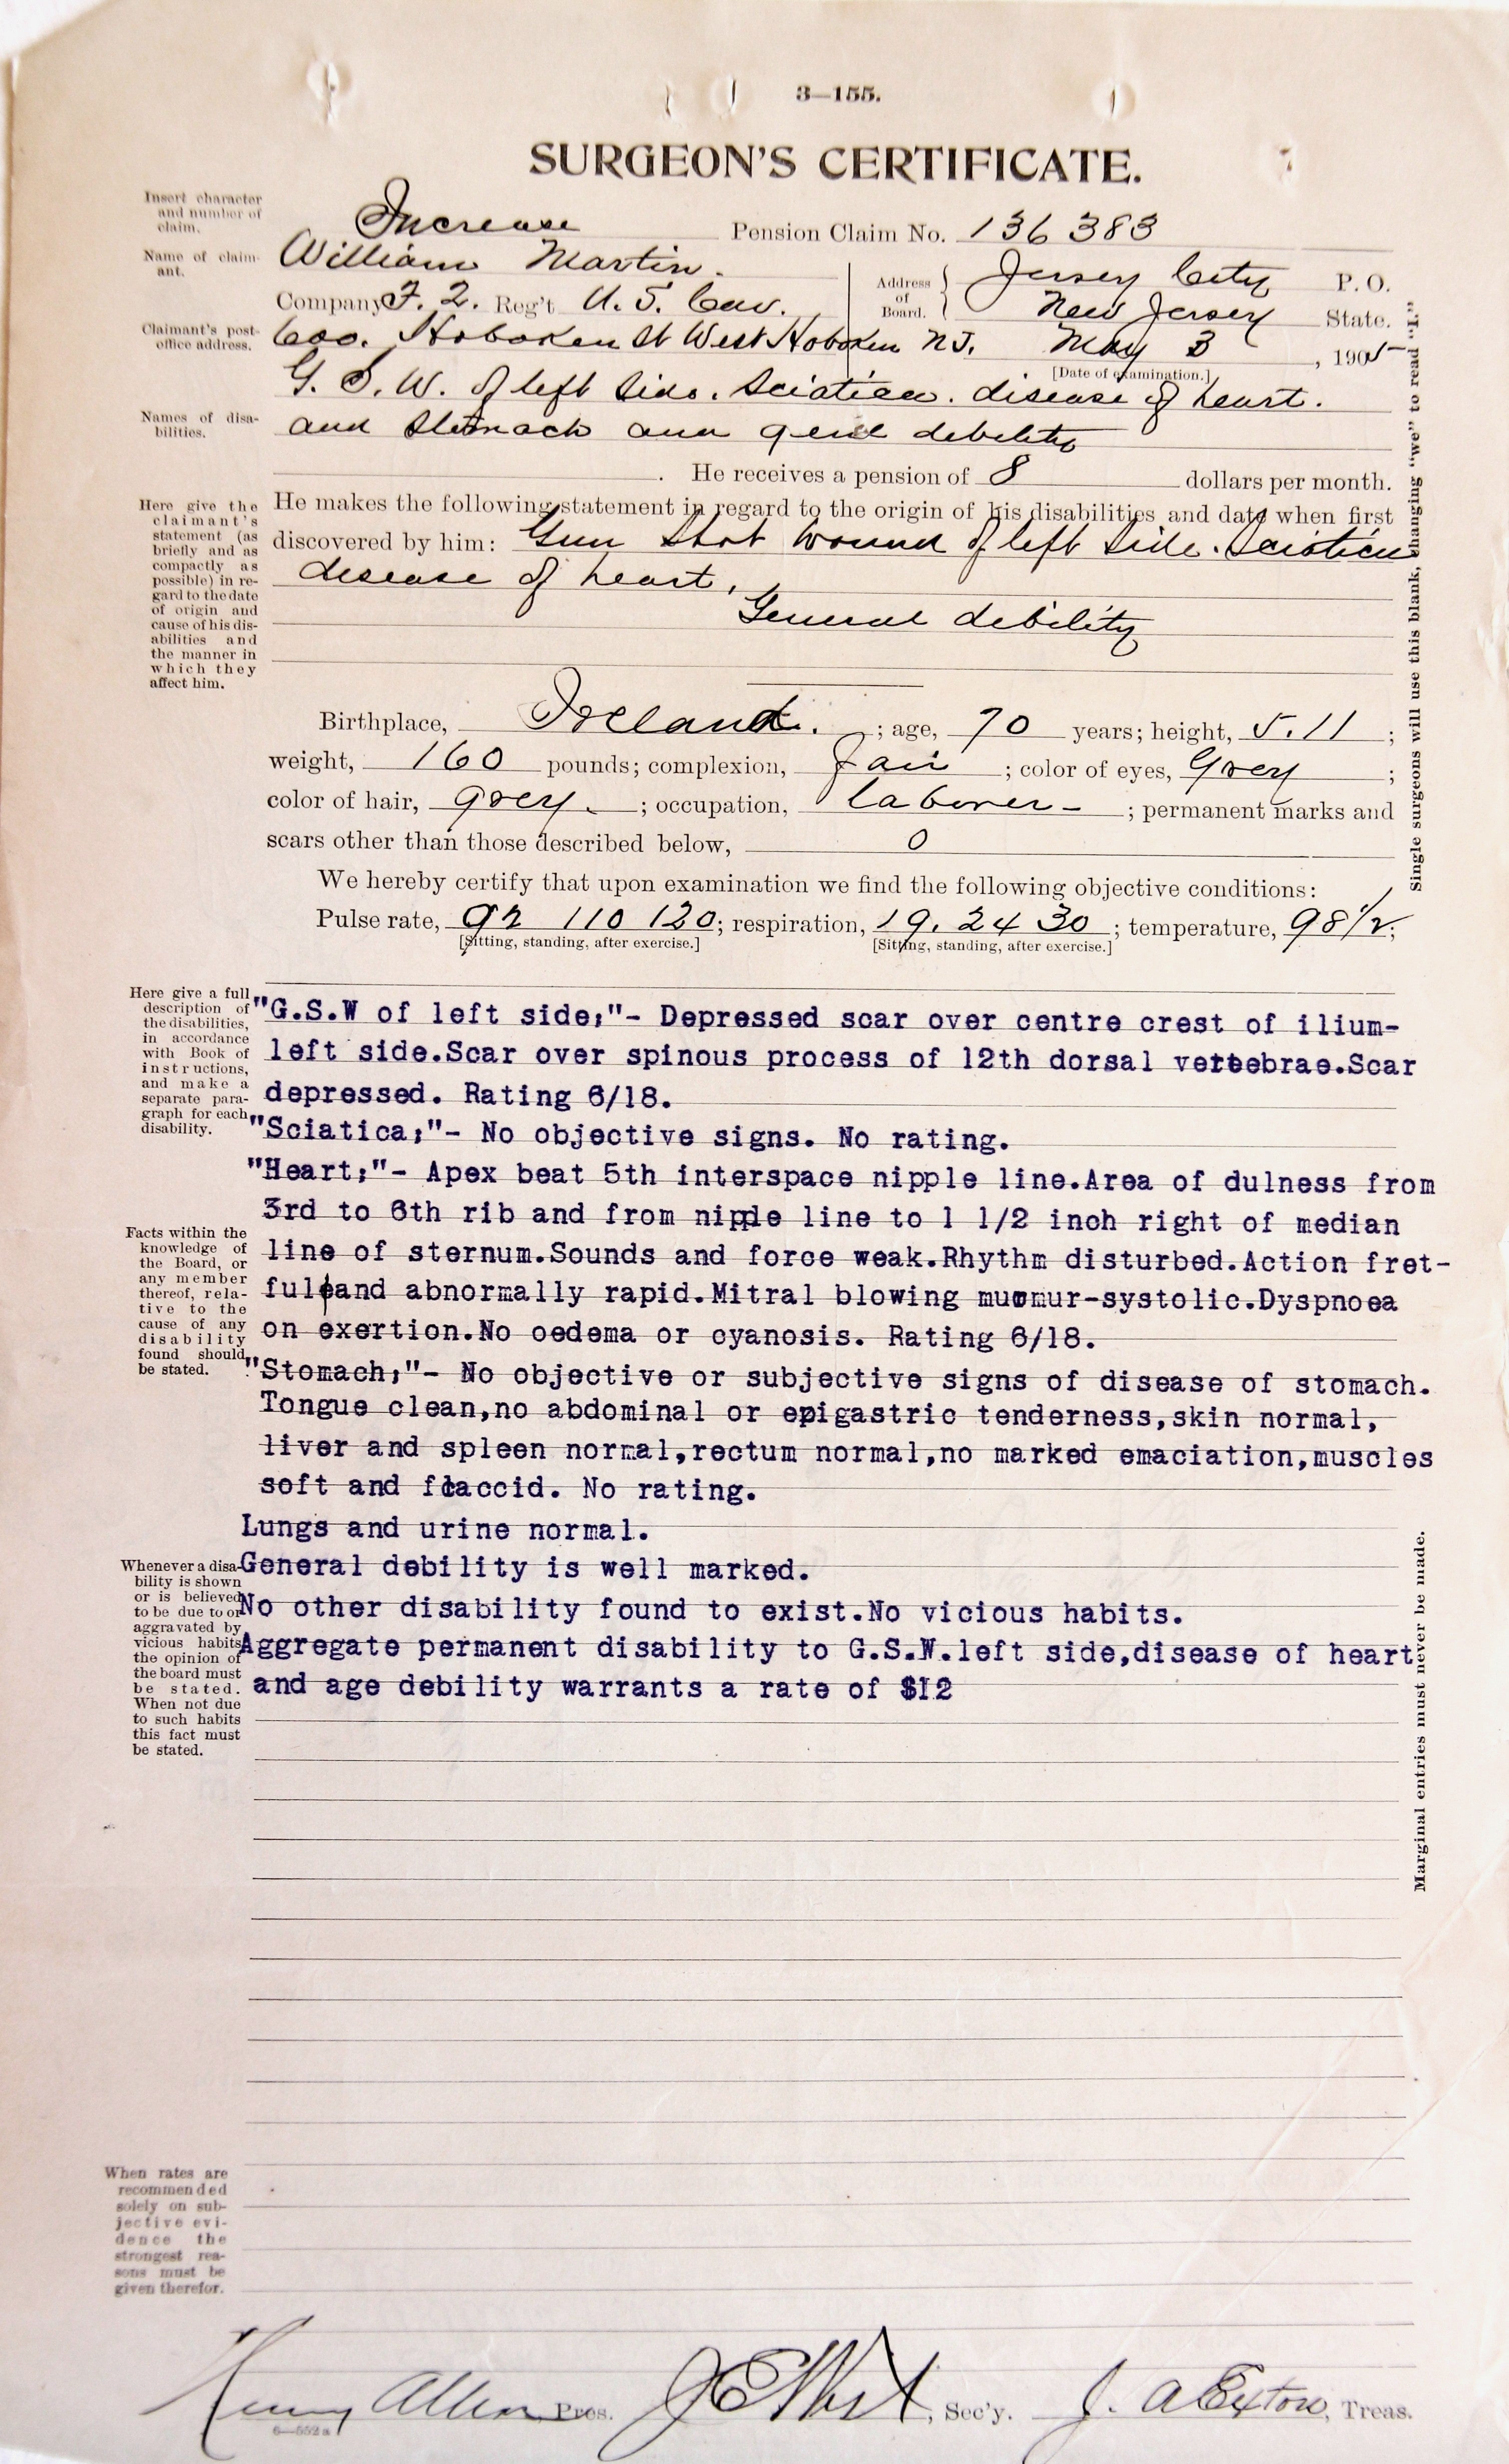 Image of the surgeon's certificate for William Martin's 1905 pension application.